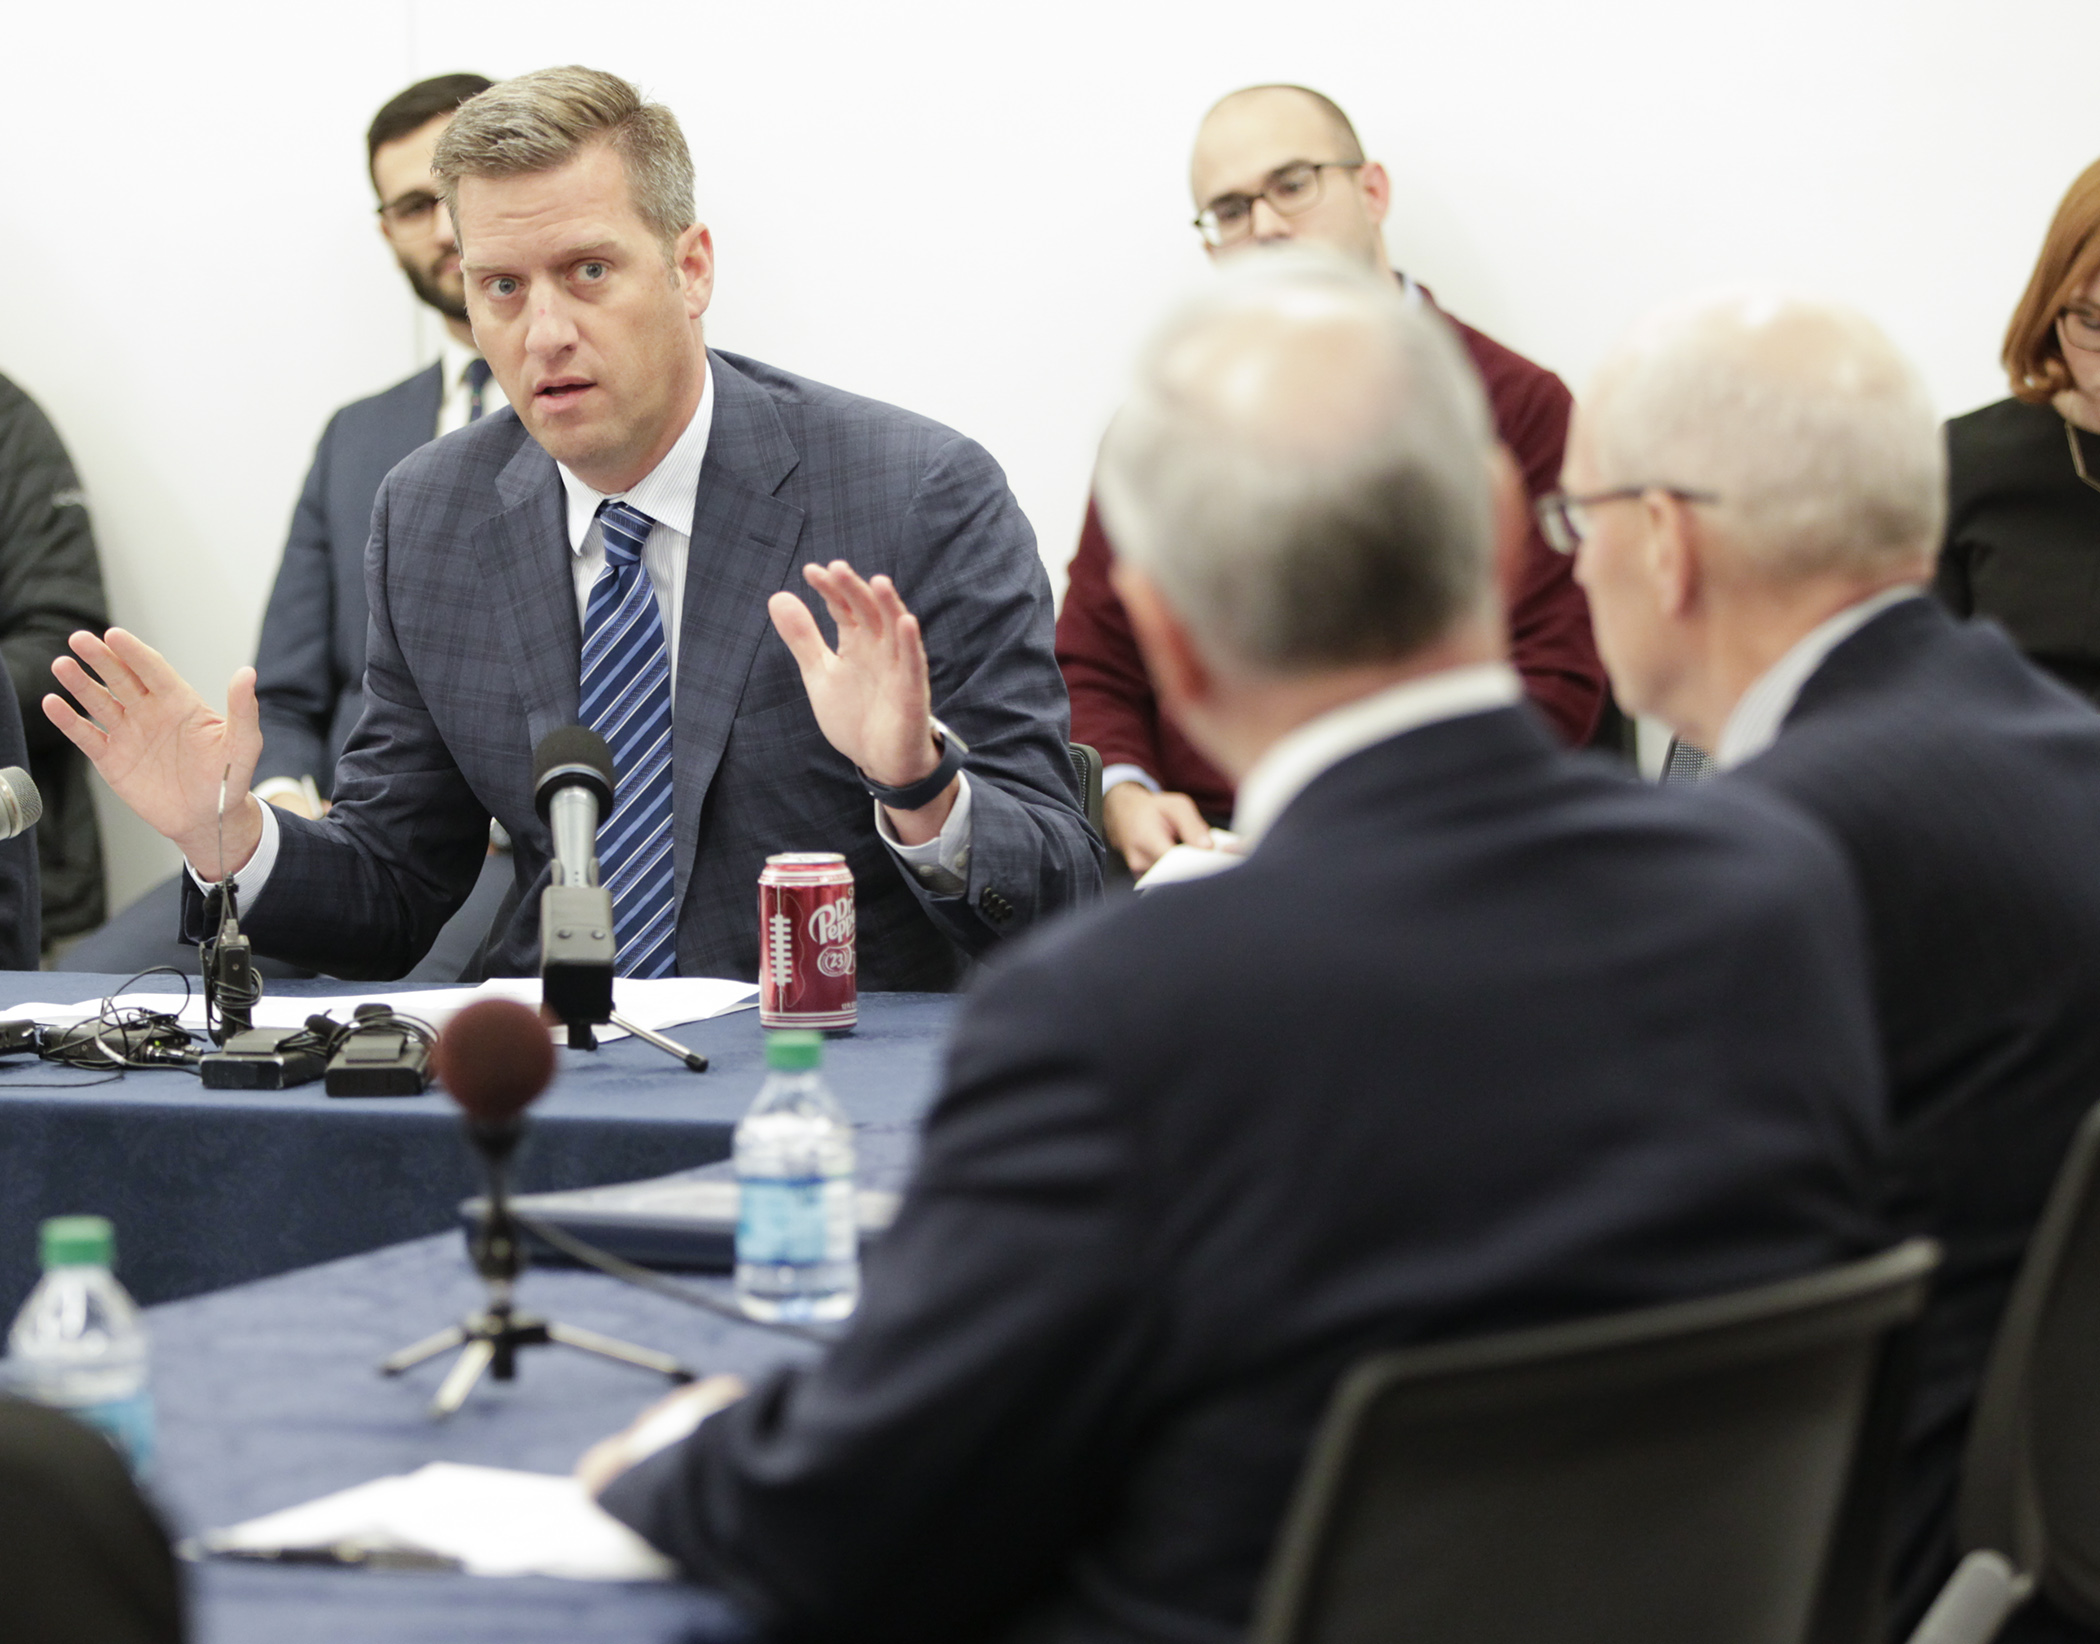 House Speaker Kurt Daudt, left, and Gov. Mark Dayton, center right, have a tense public meeting to try to negotiate a compromise for a special session to fix the health care cost crisis Dec. 16. Photo by Paul Battaglia